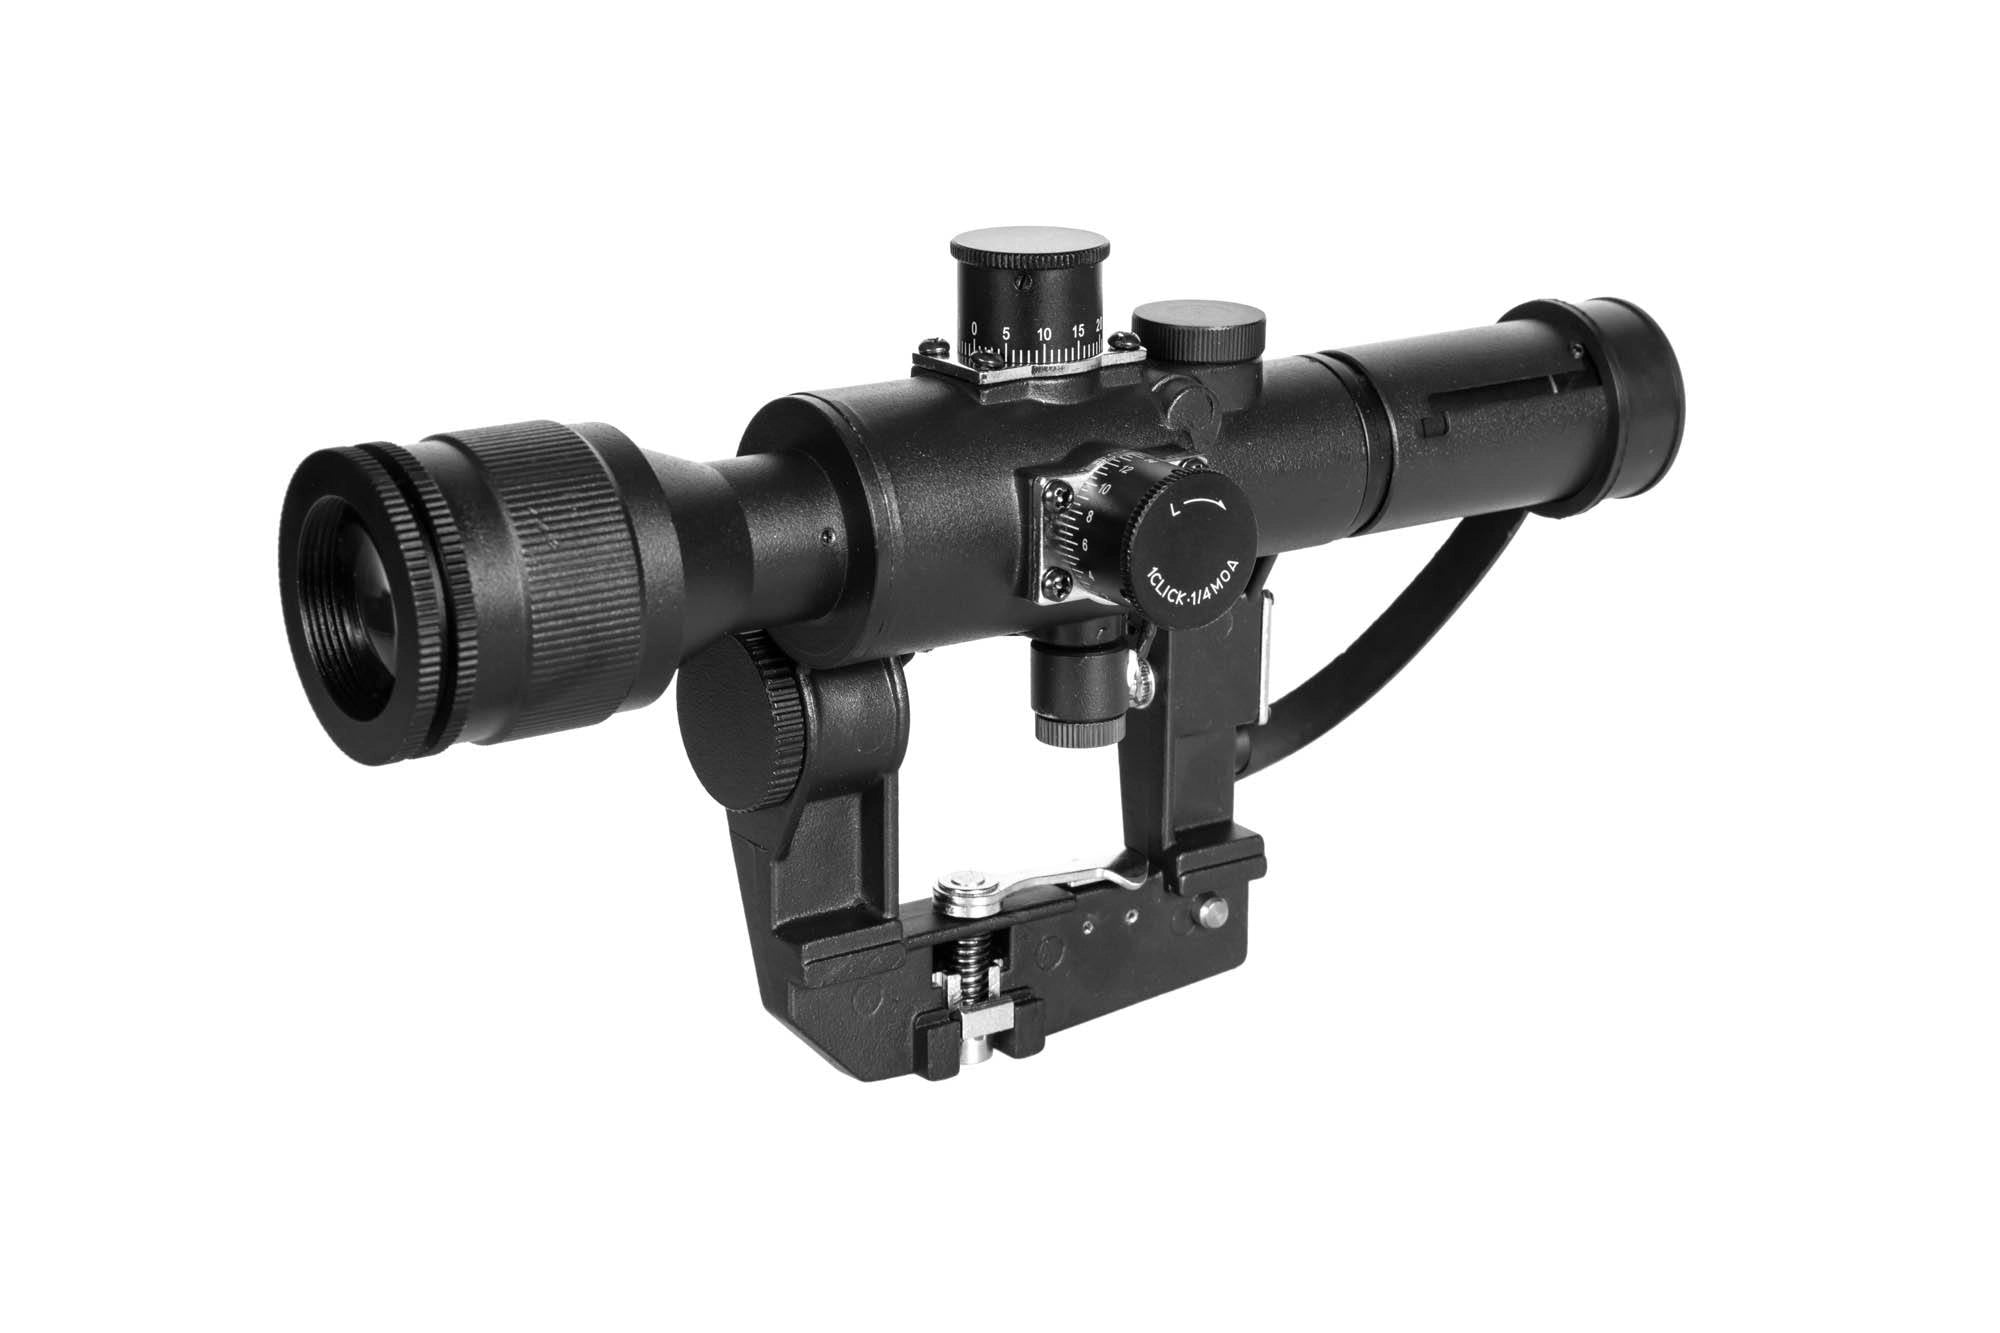 PSO-1 4 × 24 scope replica with illumination and SVD mount-1